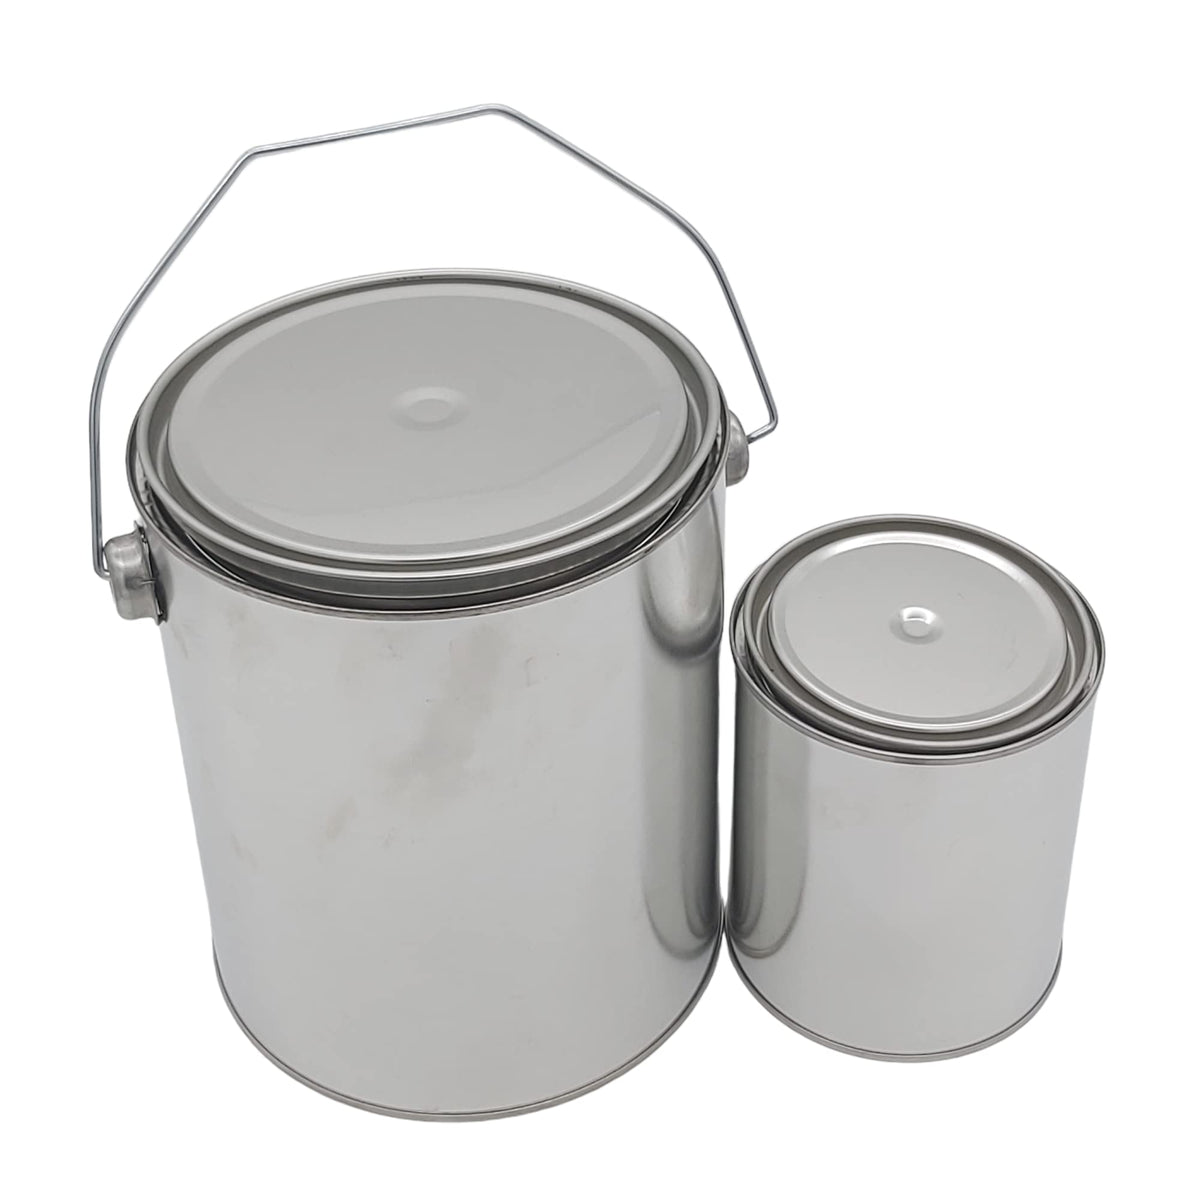 CSBD Empty Paint Can with Lid, Gallon and Quart Sizes, Unlined Multipurpose  Storage for Arts and Crafts, DIY Projects, Painting, Garage Organization